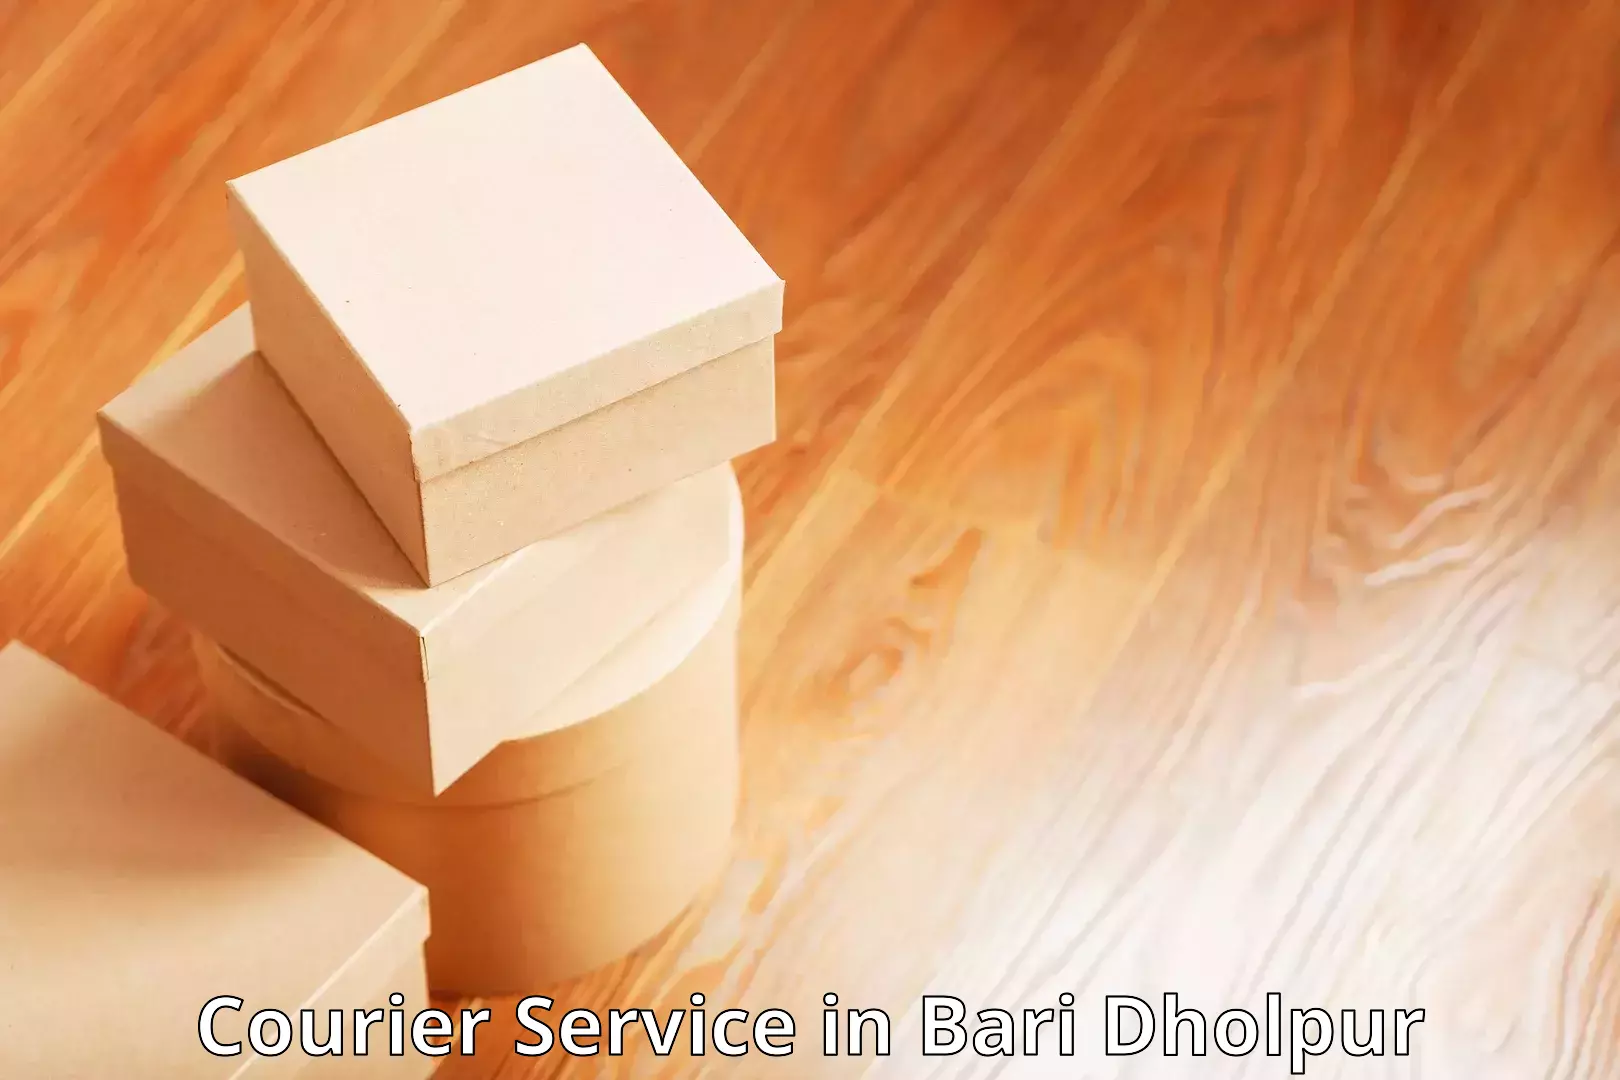 Business delivery service in Bari Dholpur